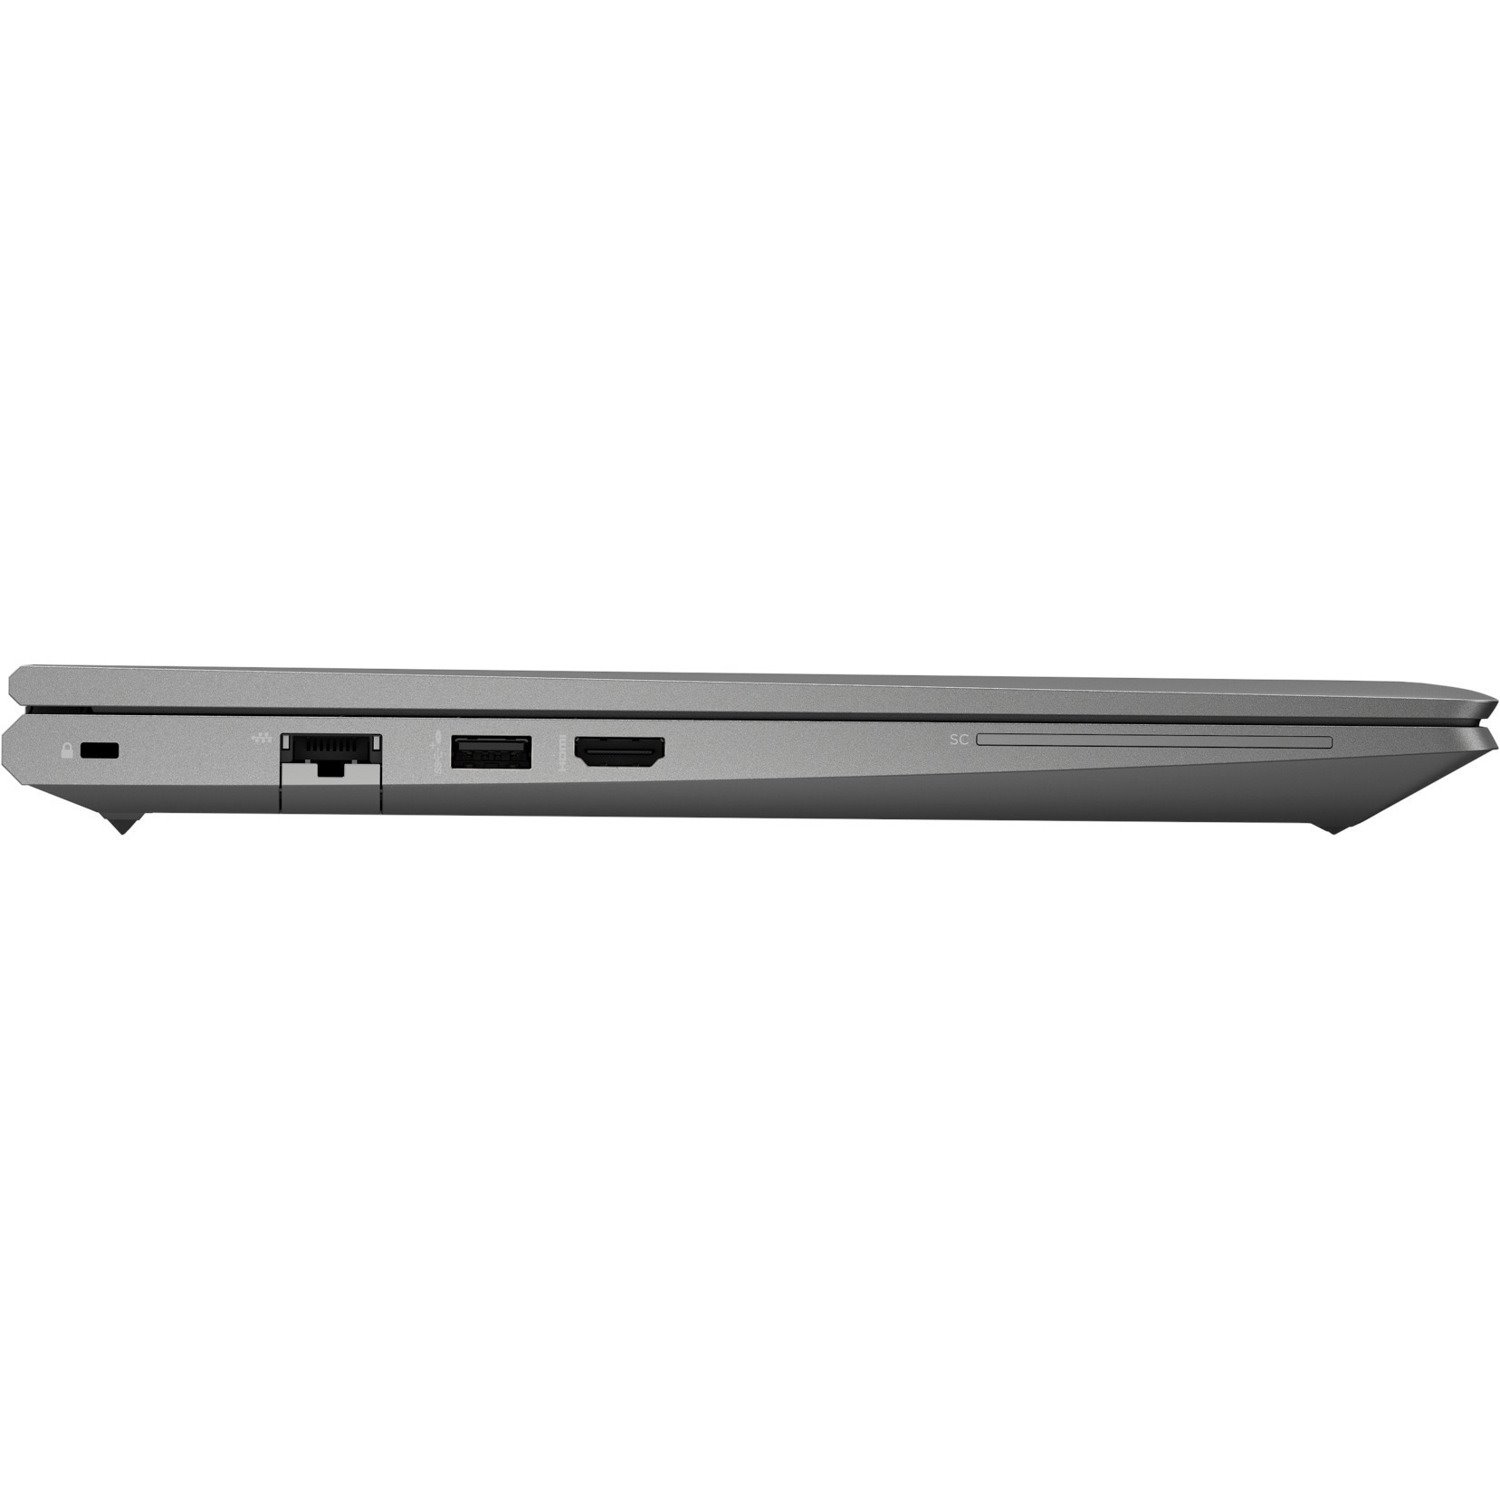 HP ZBook Power G8 15.6" Mobile Workstation - Intel Core i9 11th Gen i9-11950H - 64 GB - 2 TB SSD